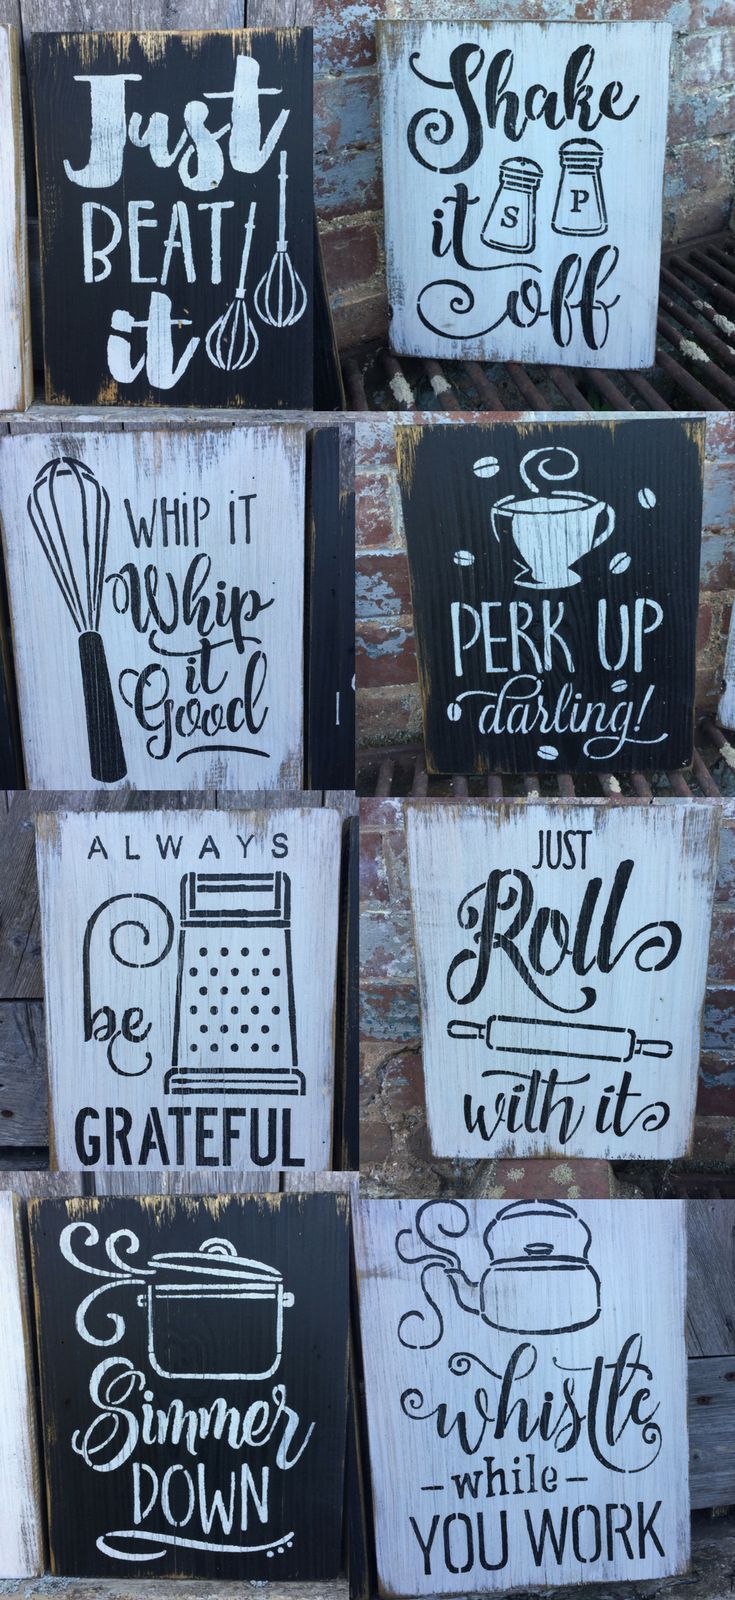 Details about Rustic Wood Signs - The Cute Kitchen Collection - 10 - Free Color Customization -   24 diy wall kitchen
 ideas